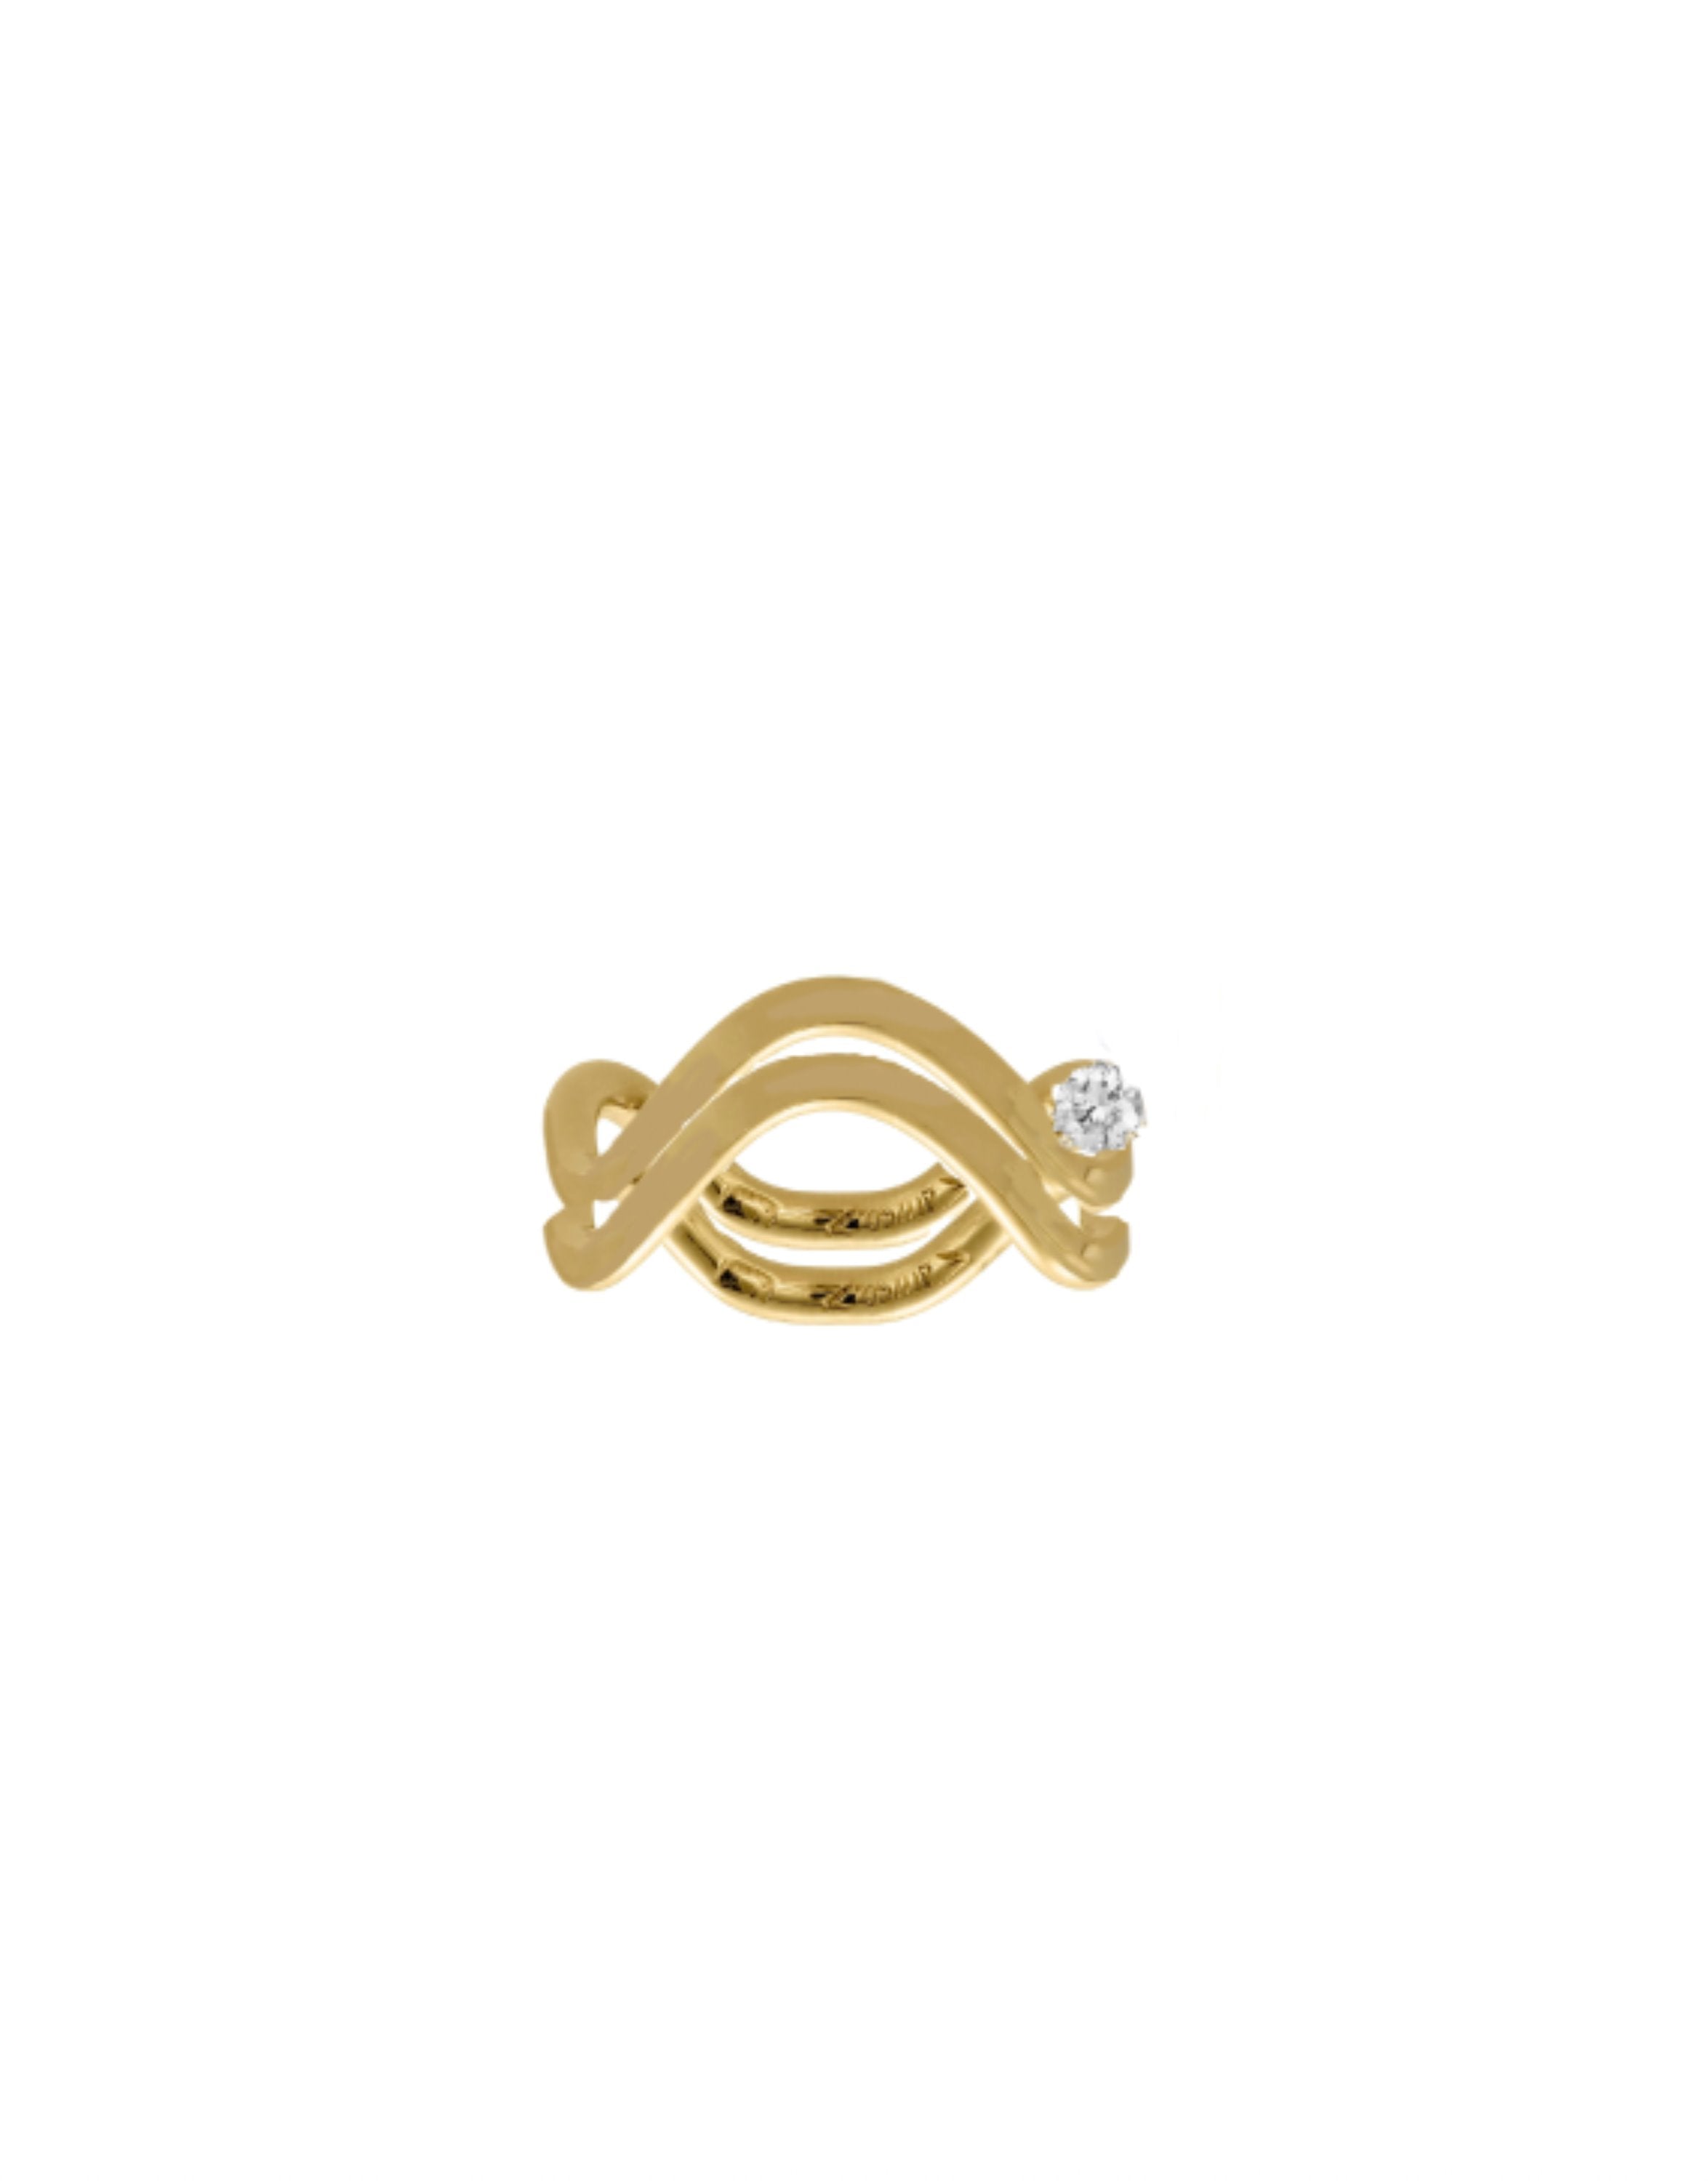 DOUBLE PETITE COMETE SOLITAIRE RING Rings Nayestones 